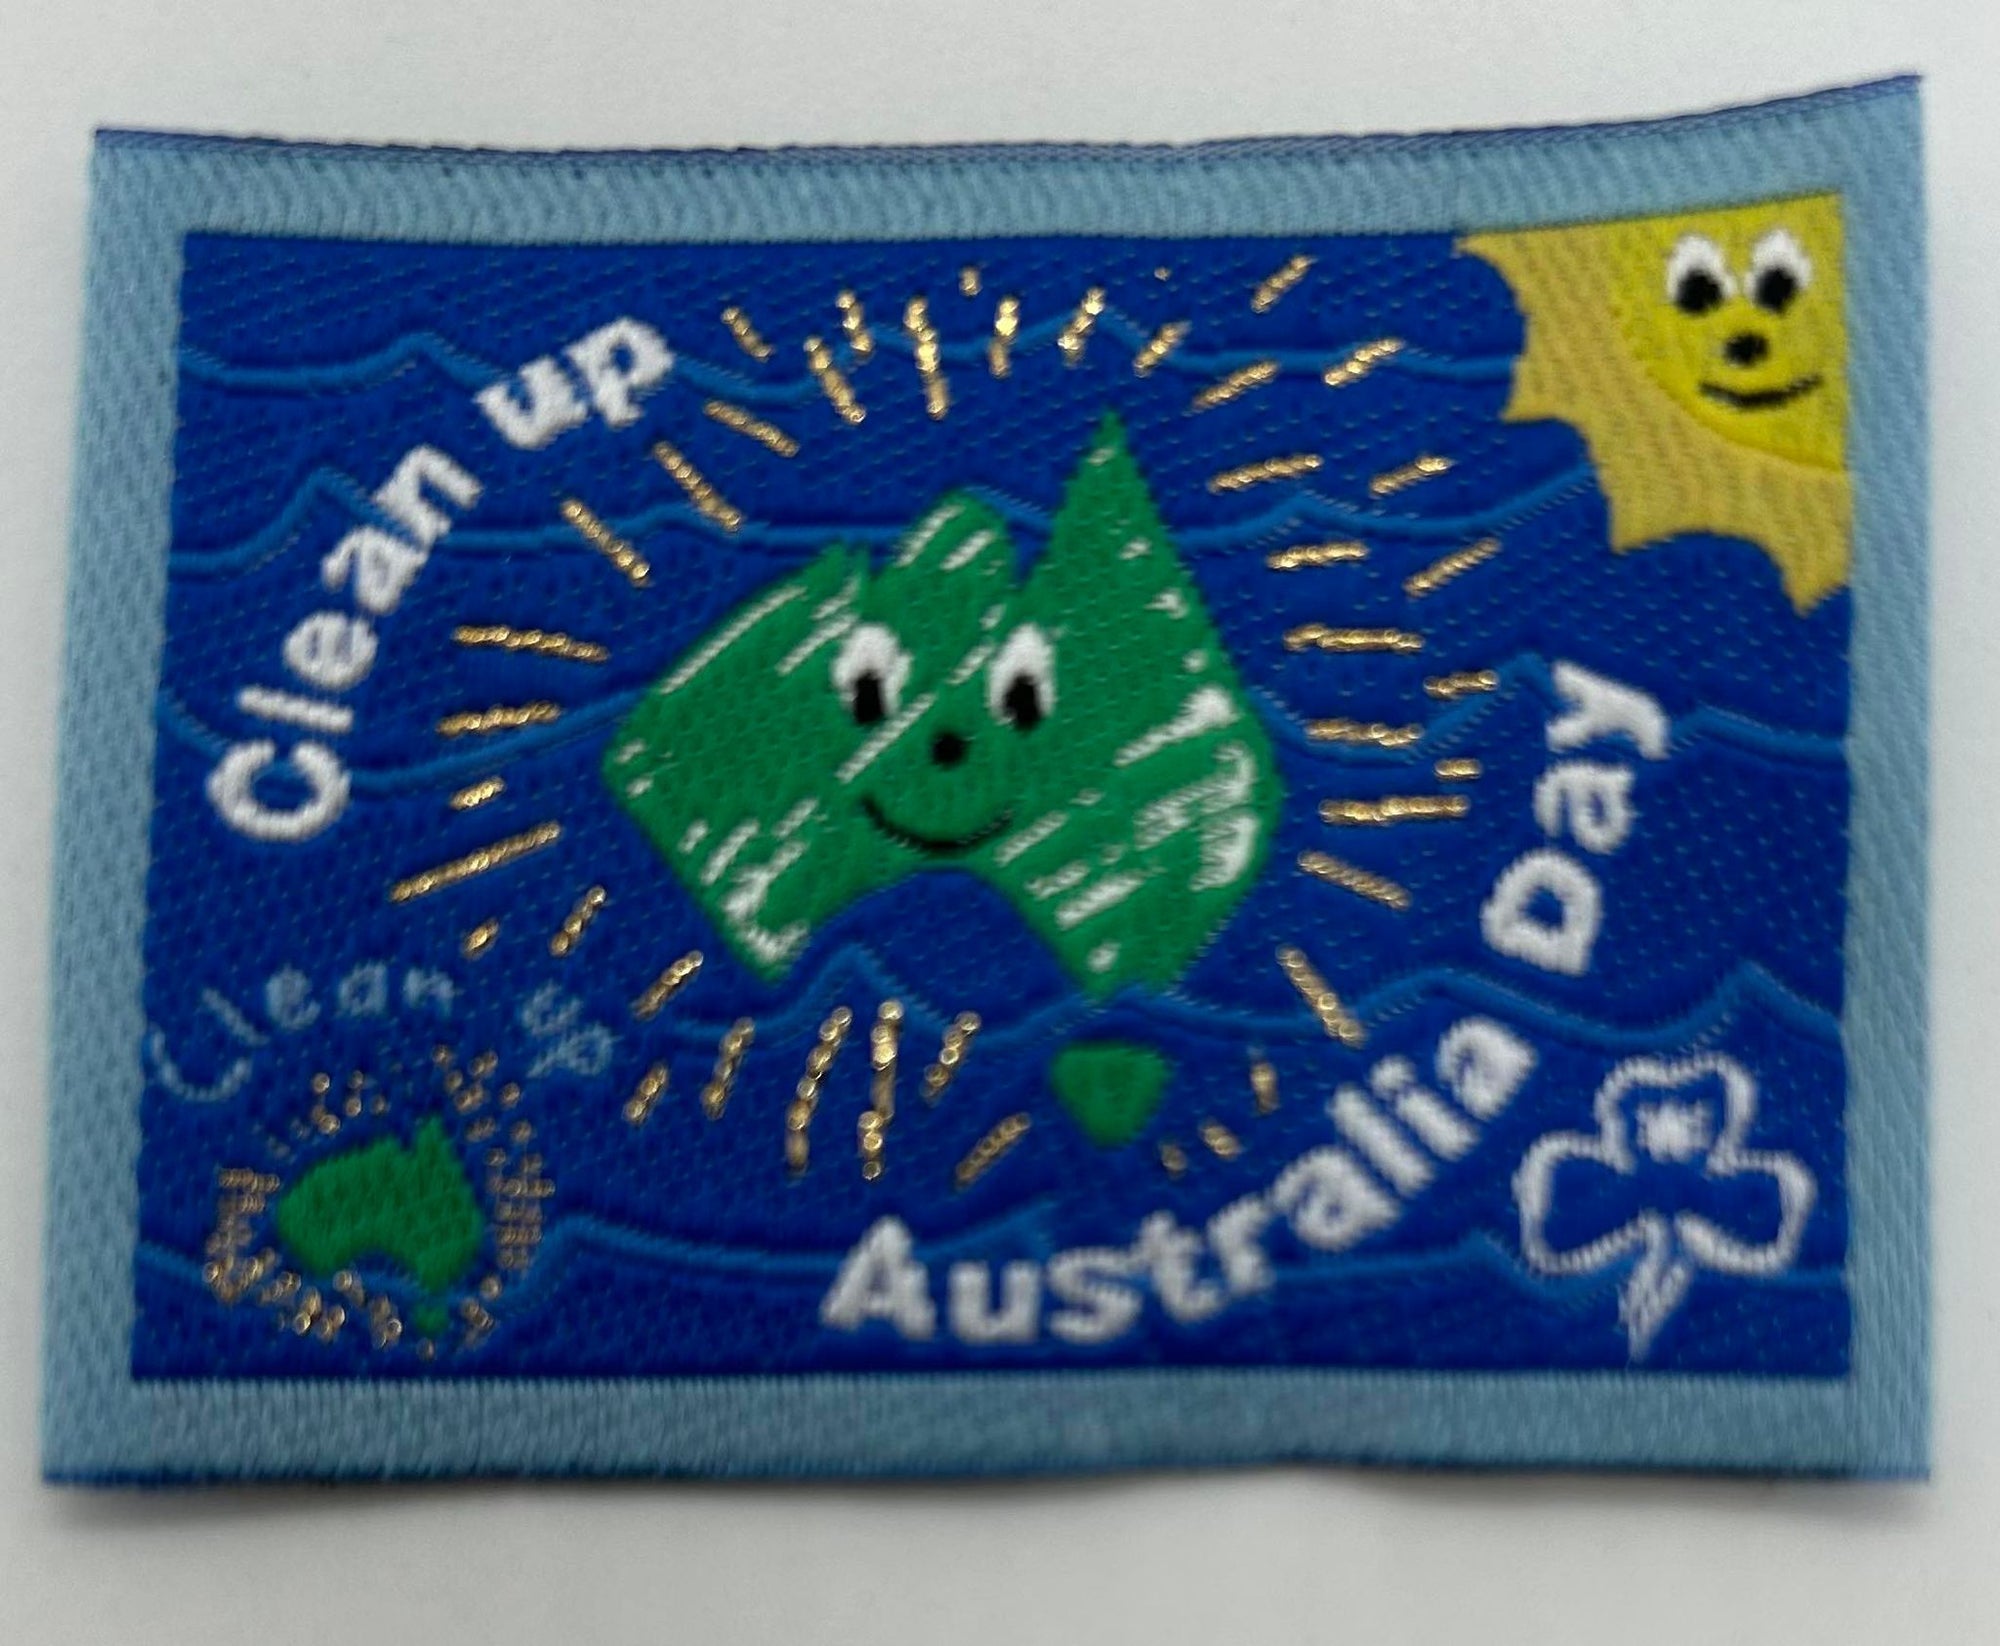 an unbound cloth badge with a map of Australia on a blue background surrounded by a lighter blue border